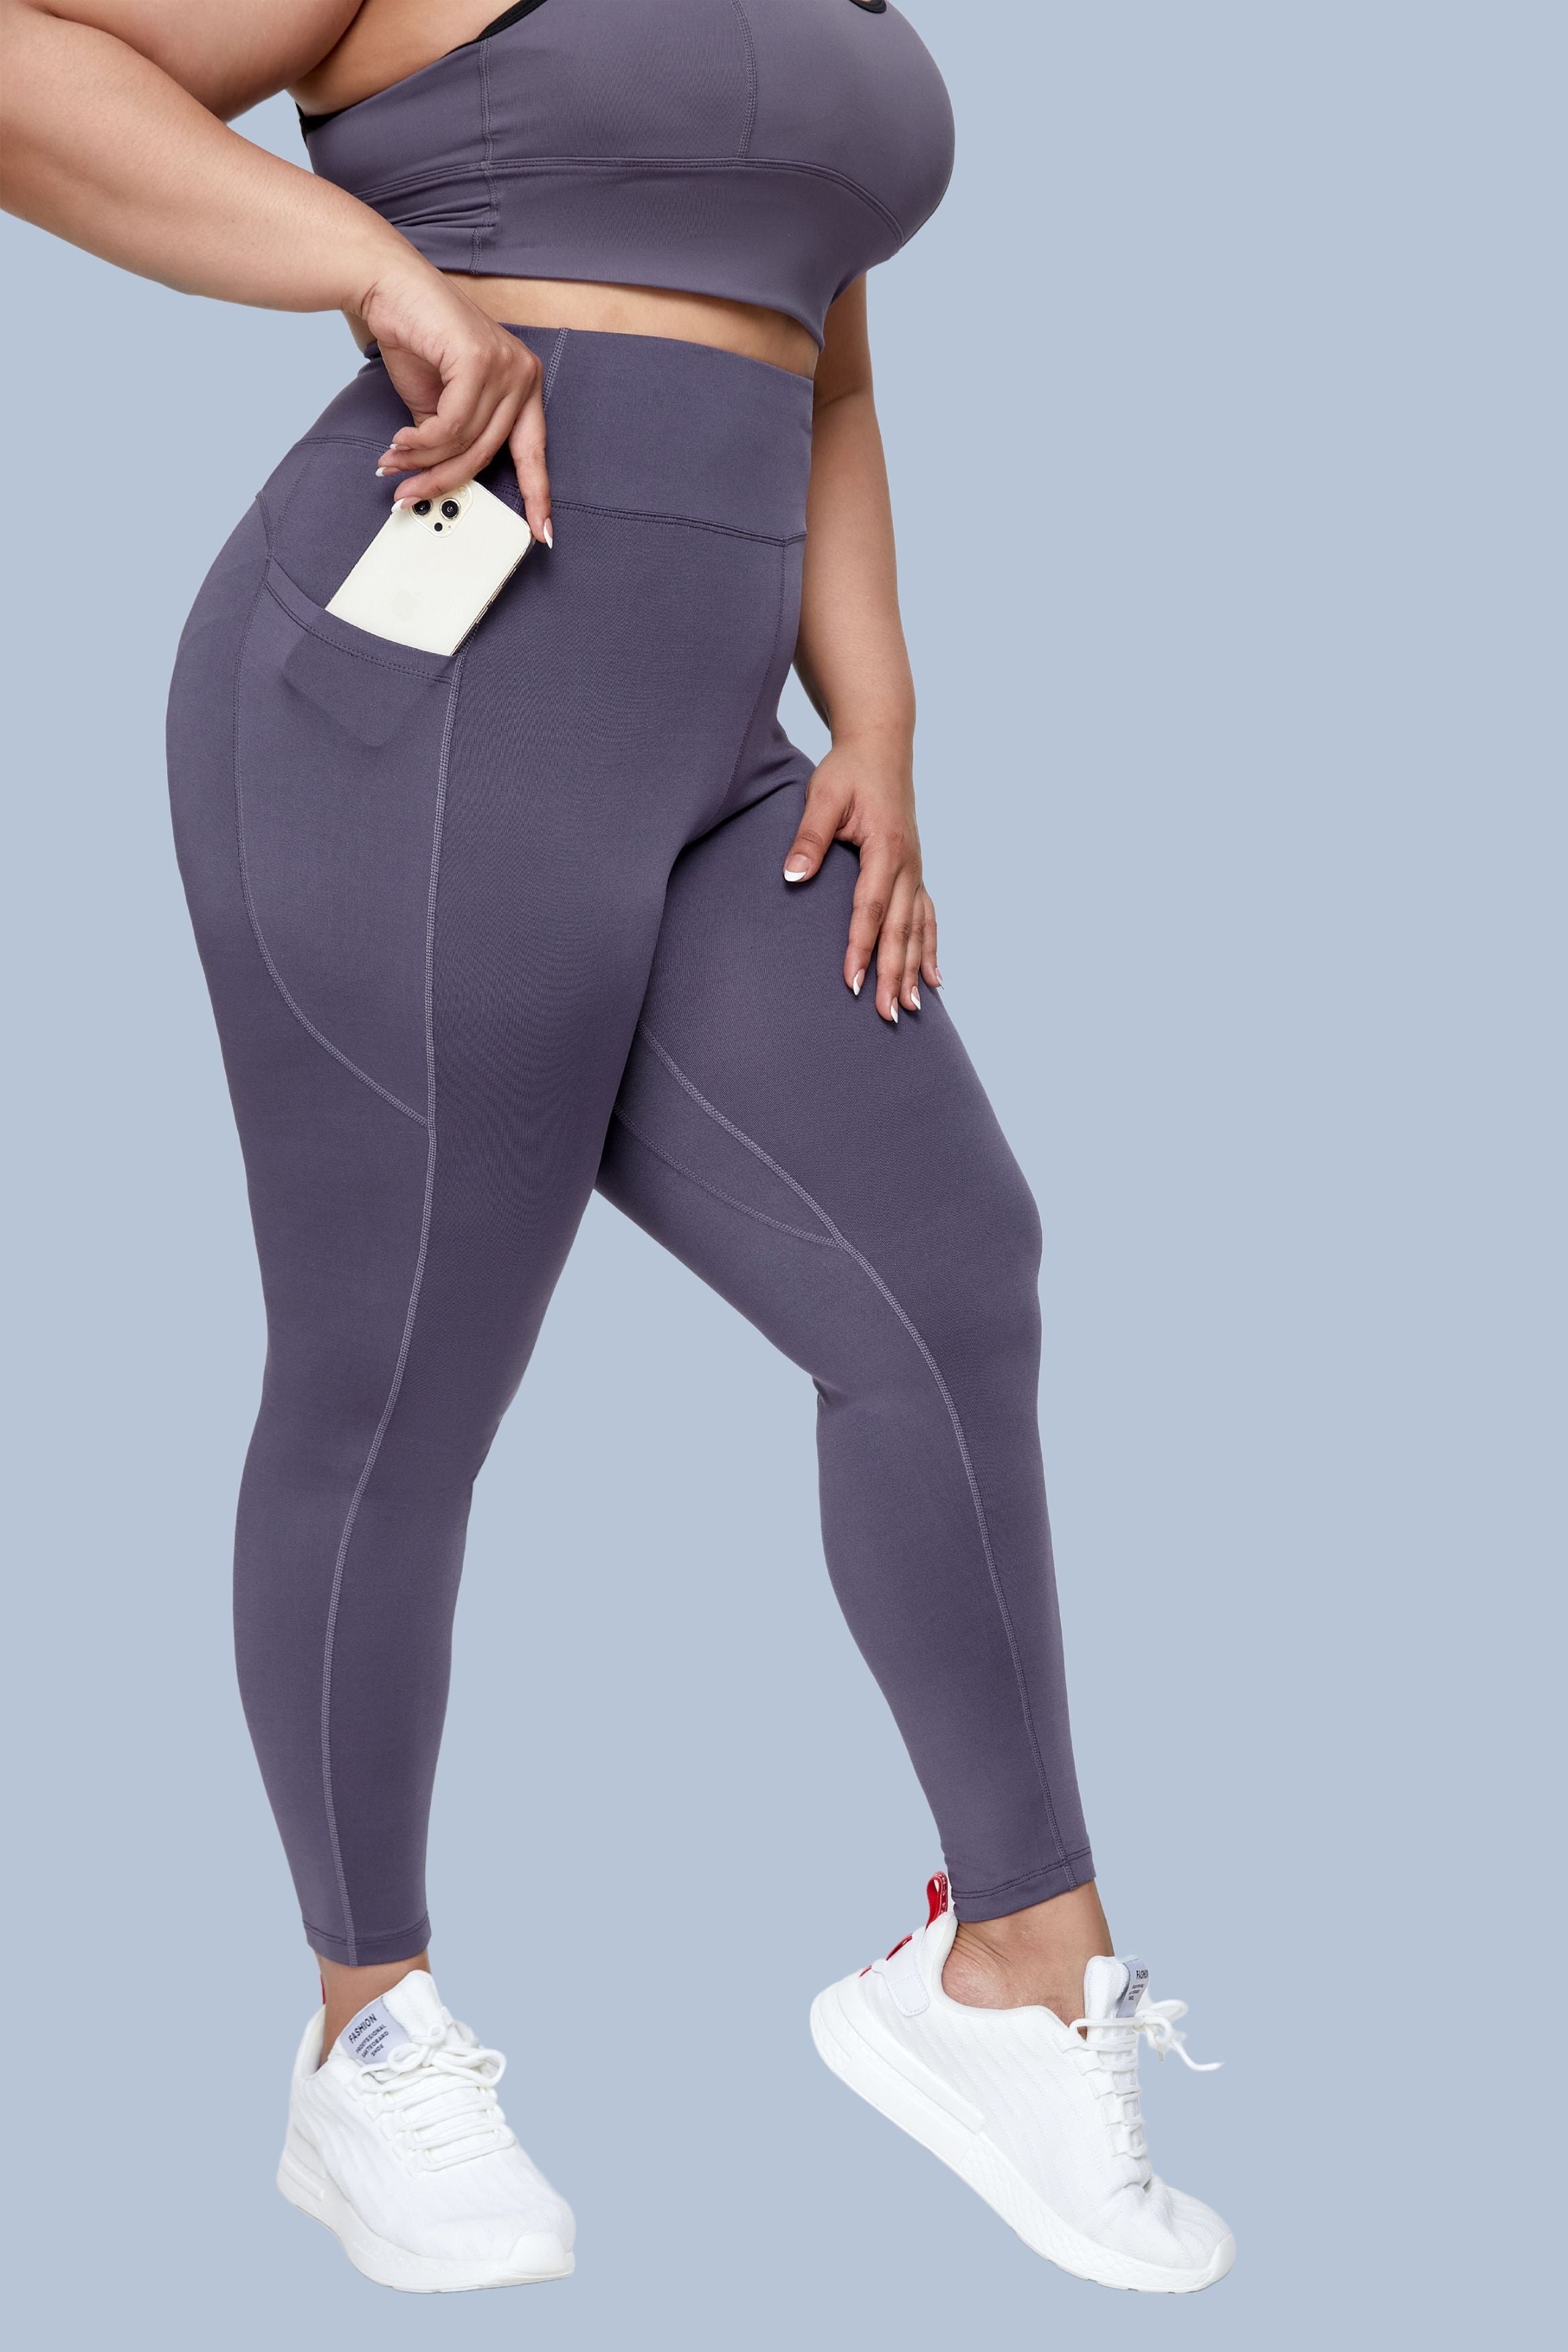 SZXZYGS Lined Leggings Women Plus Size with Pockets Womens